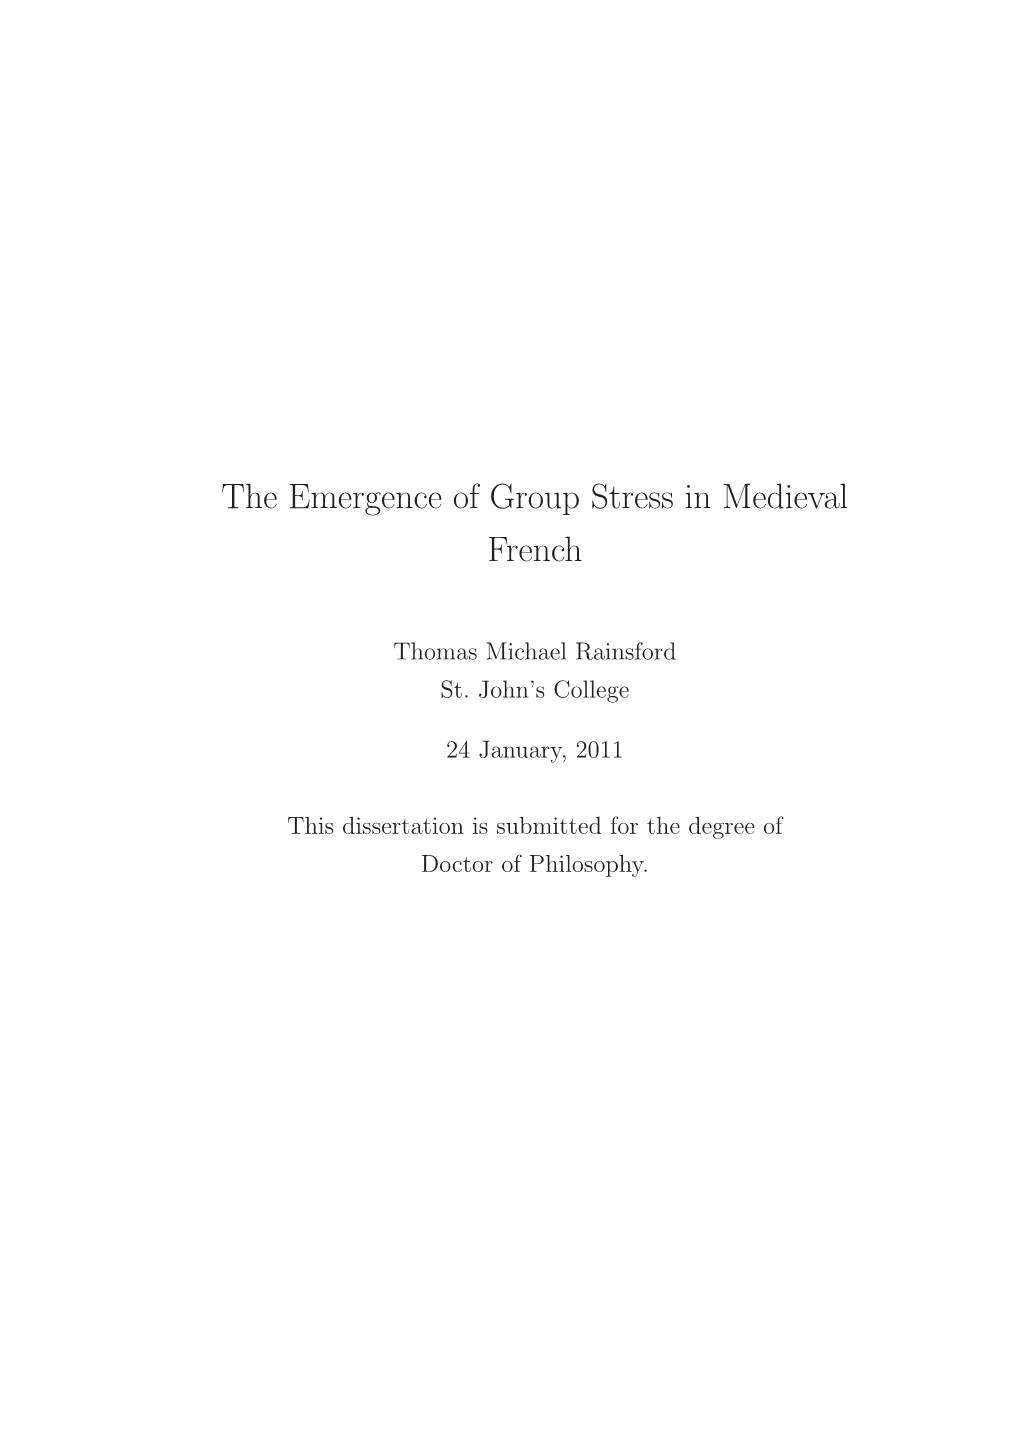 The Emergence of Group Stress in Medieval French